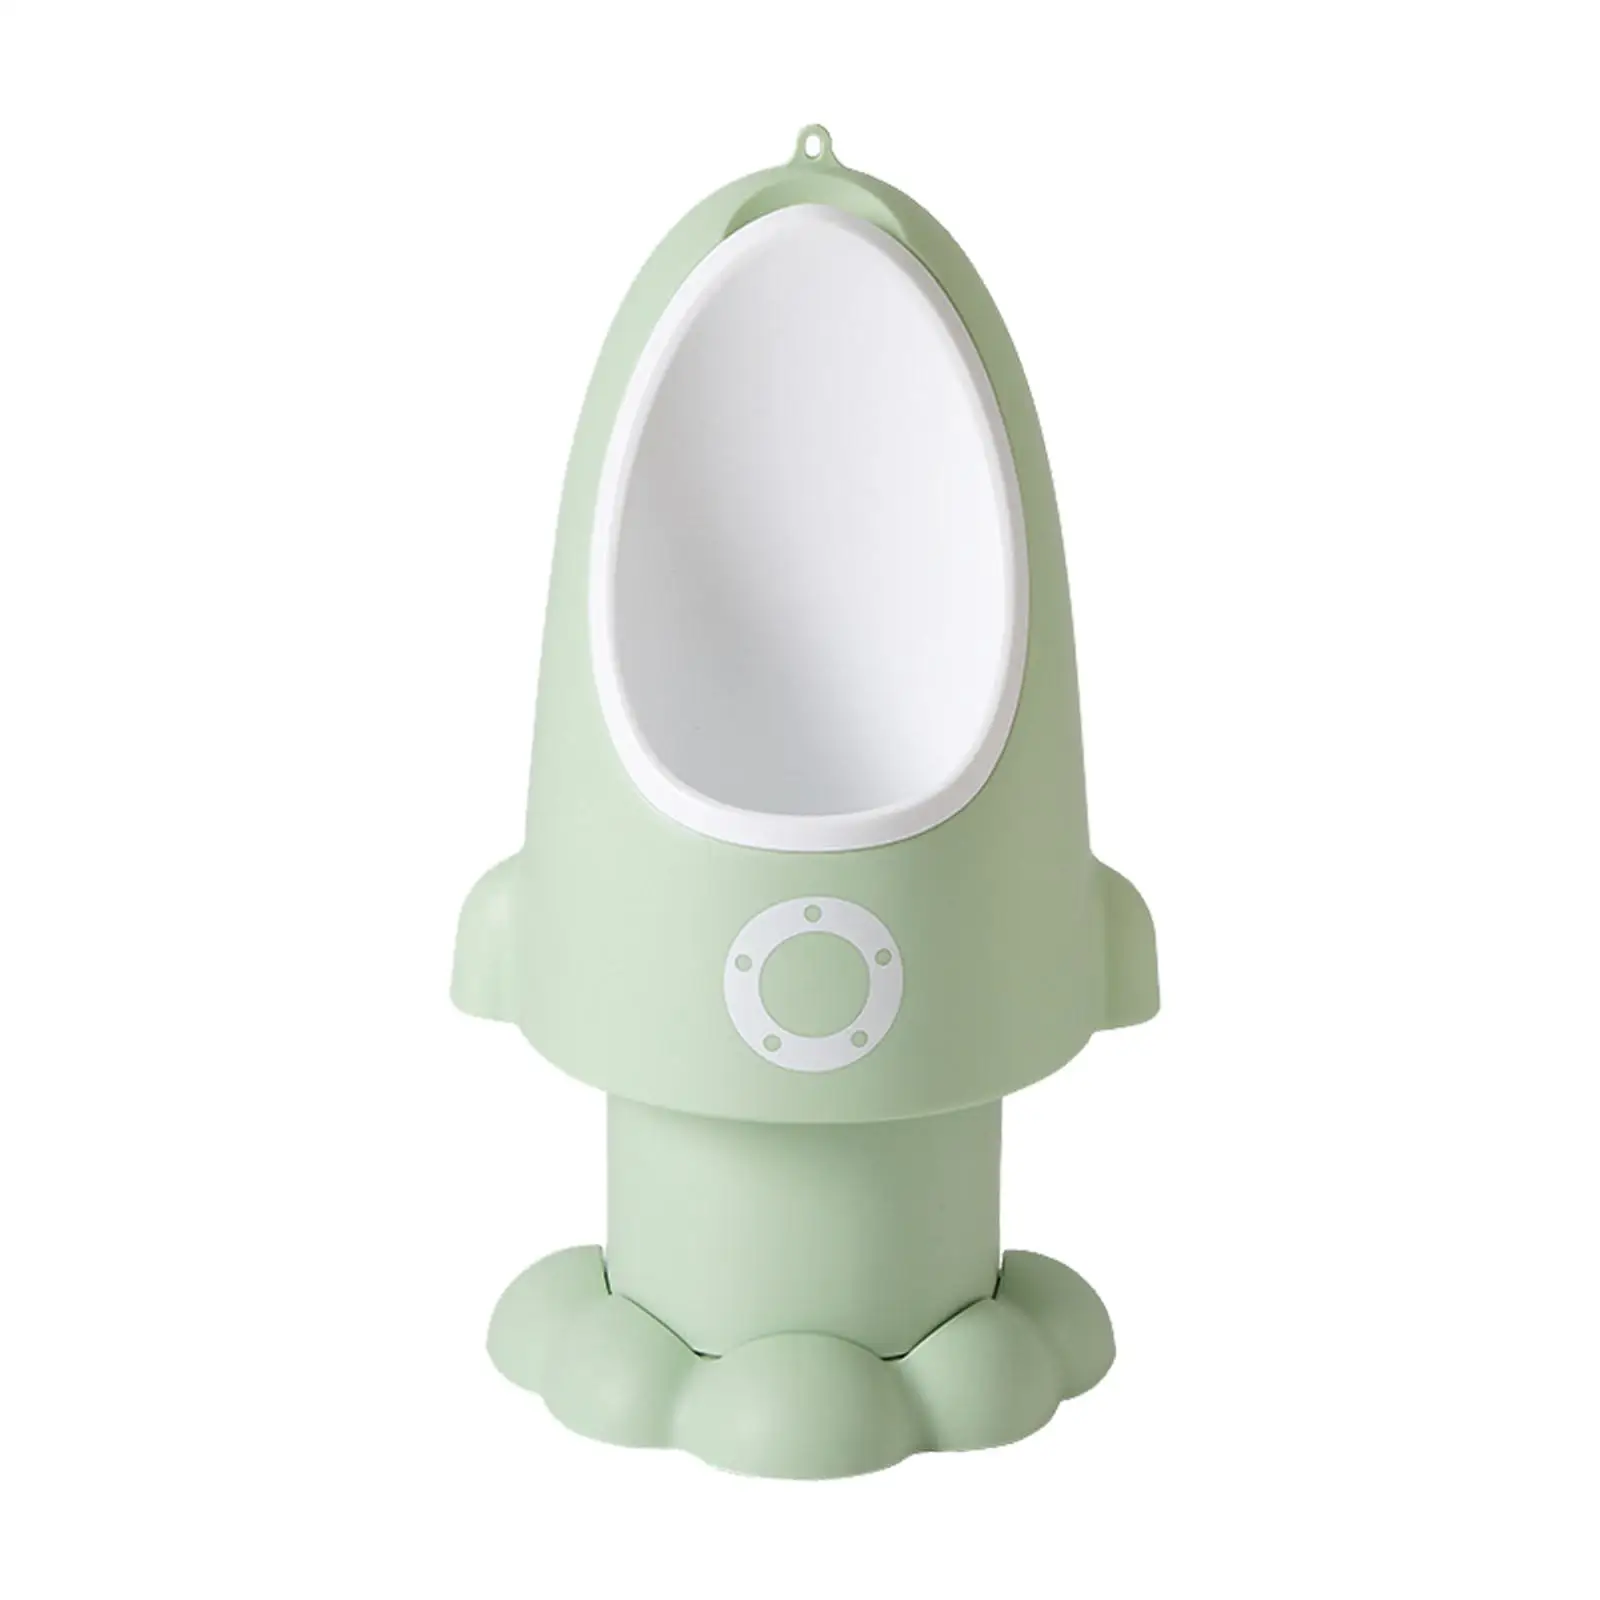 Rocket Shape Child Potty Urinal Hanging Pee Trainer Urinal Trainer for Boys